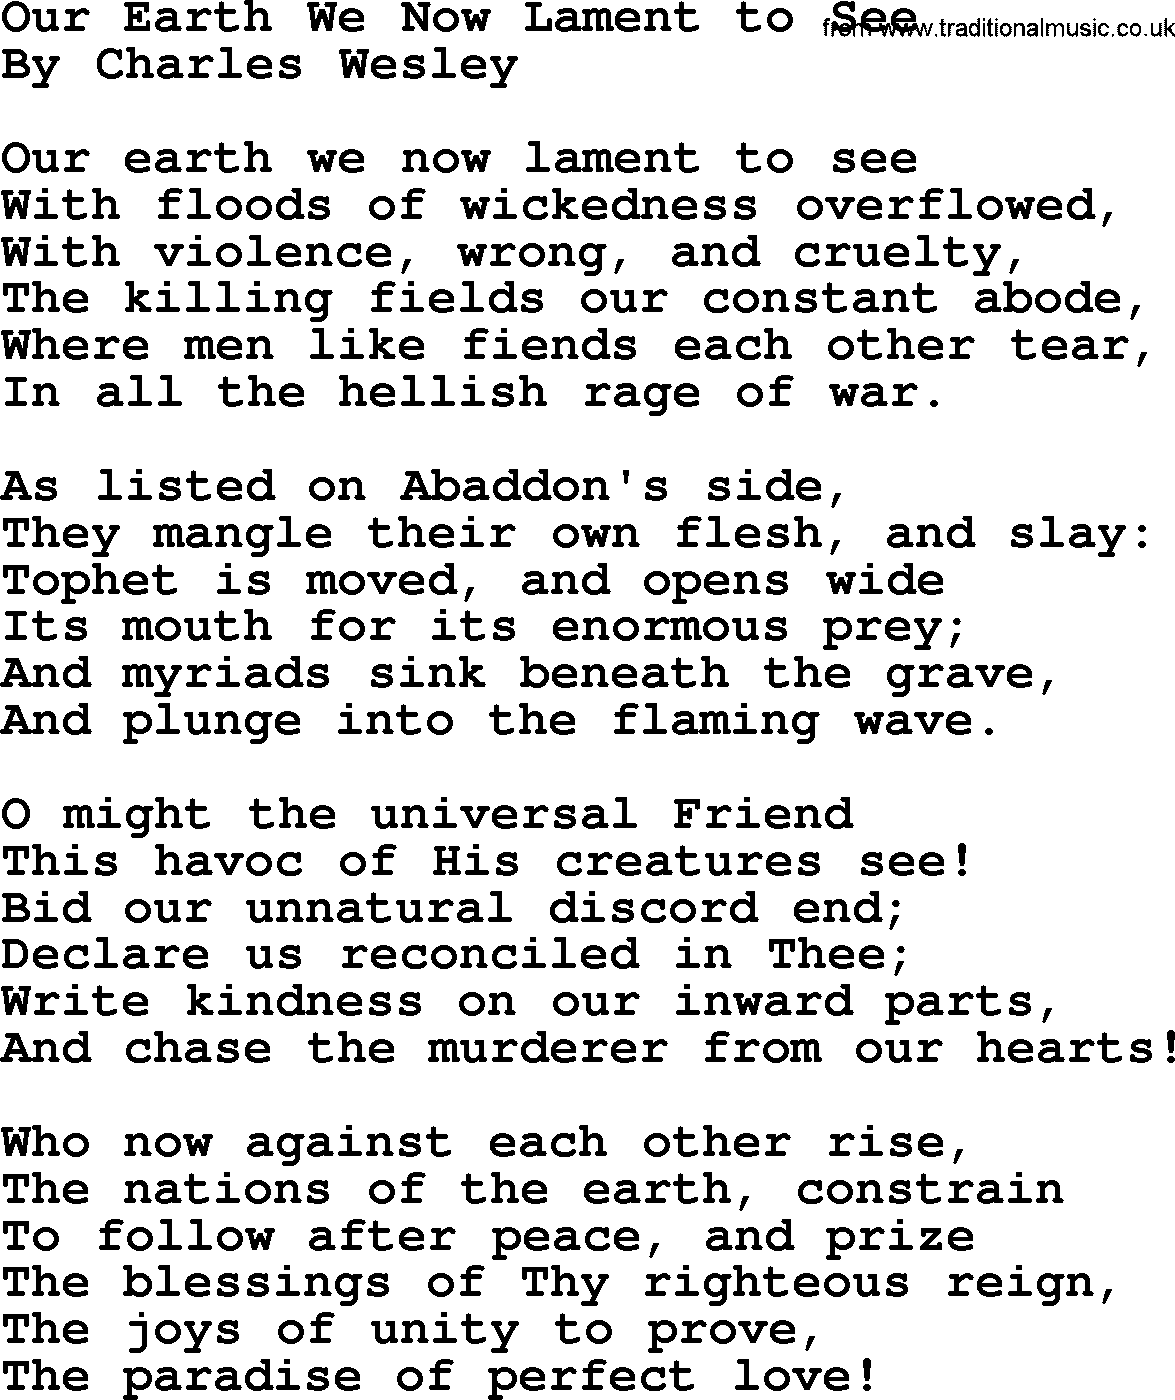 Charles Wesley hymn: Our Earth We Now Lament To See, lyrics